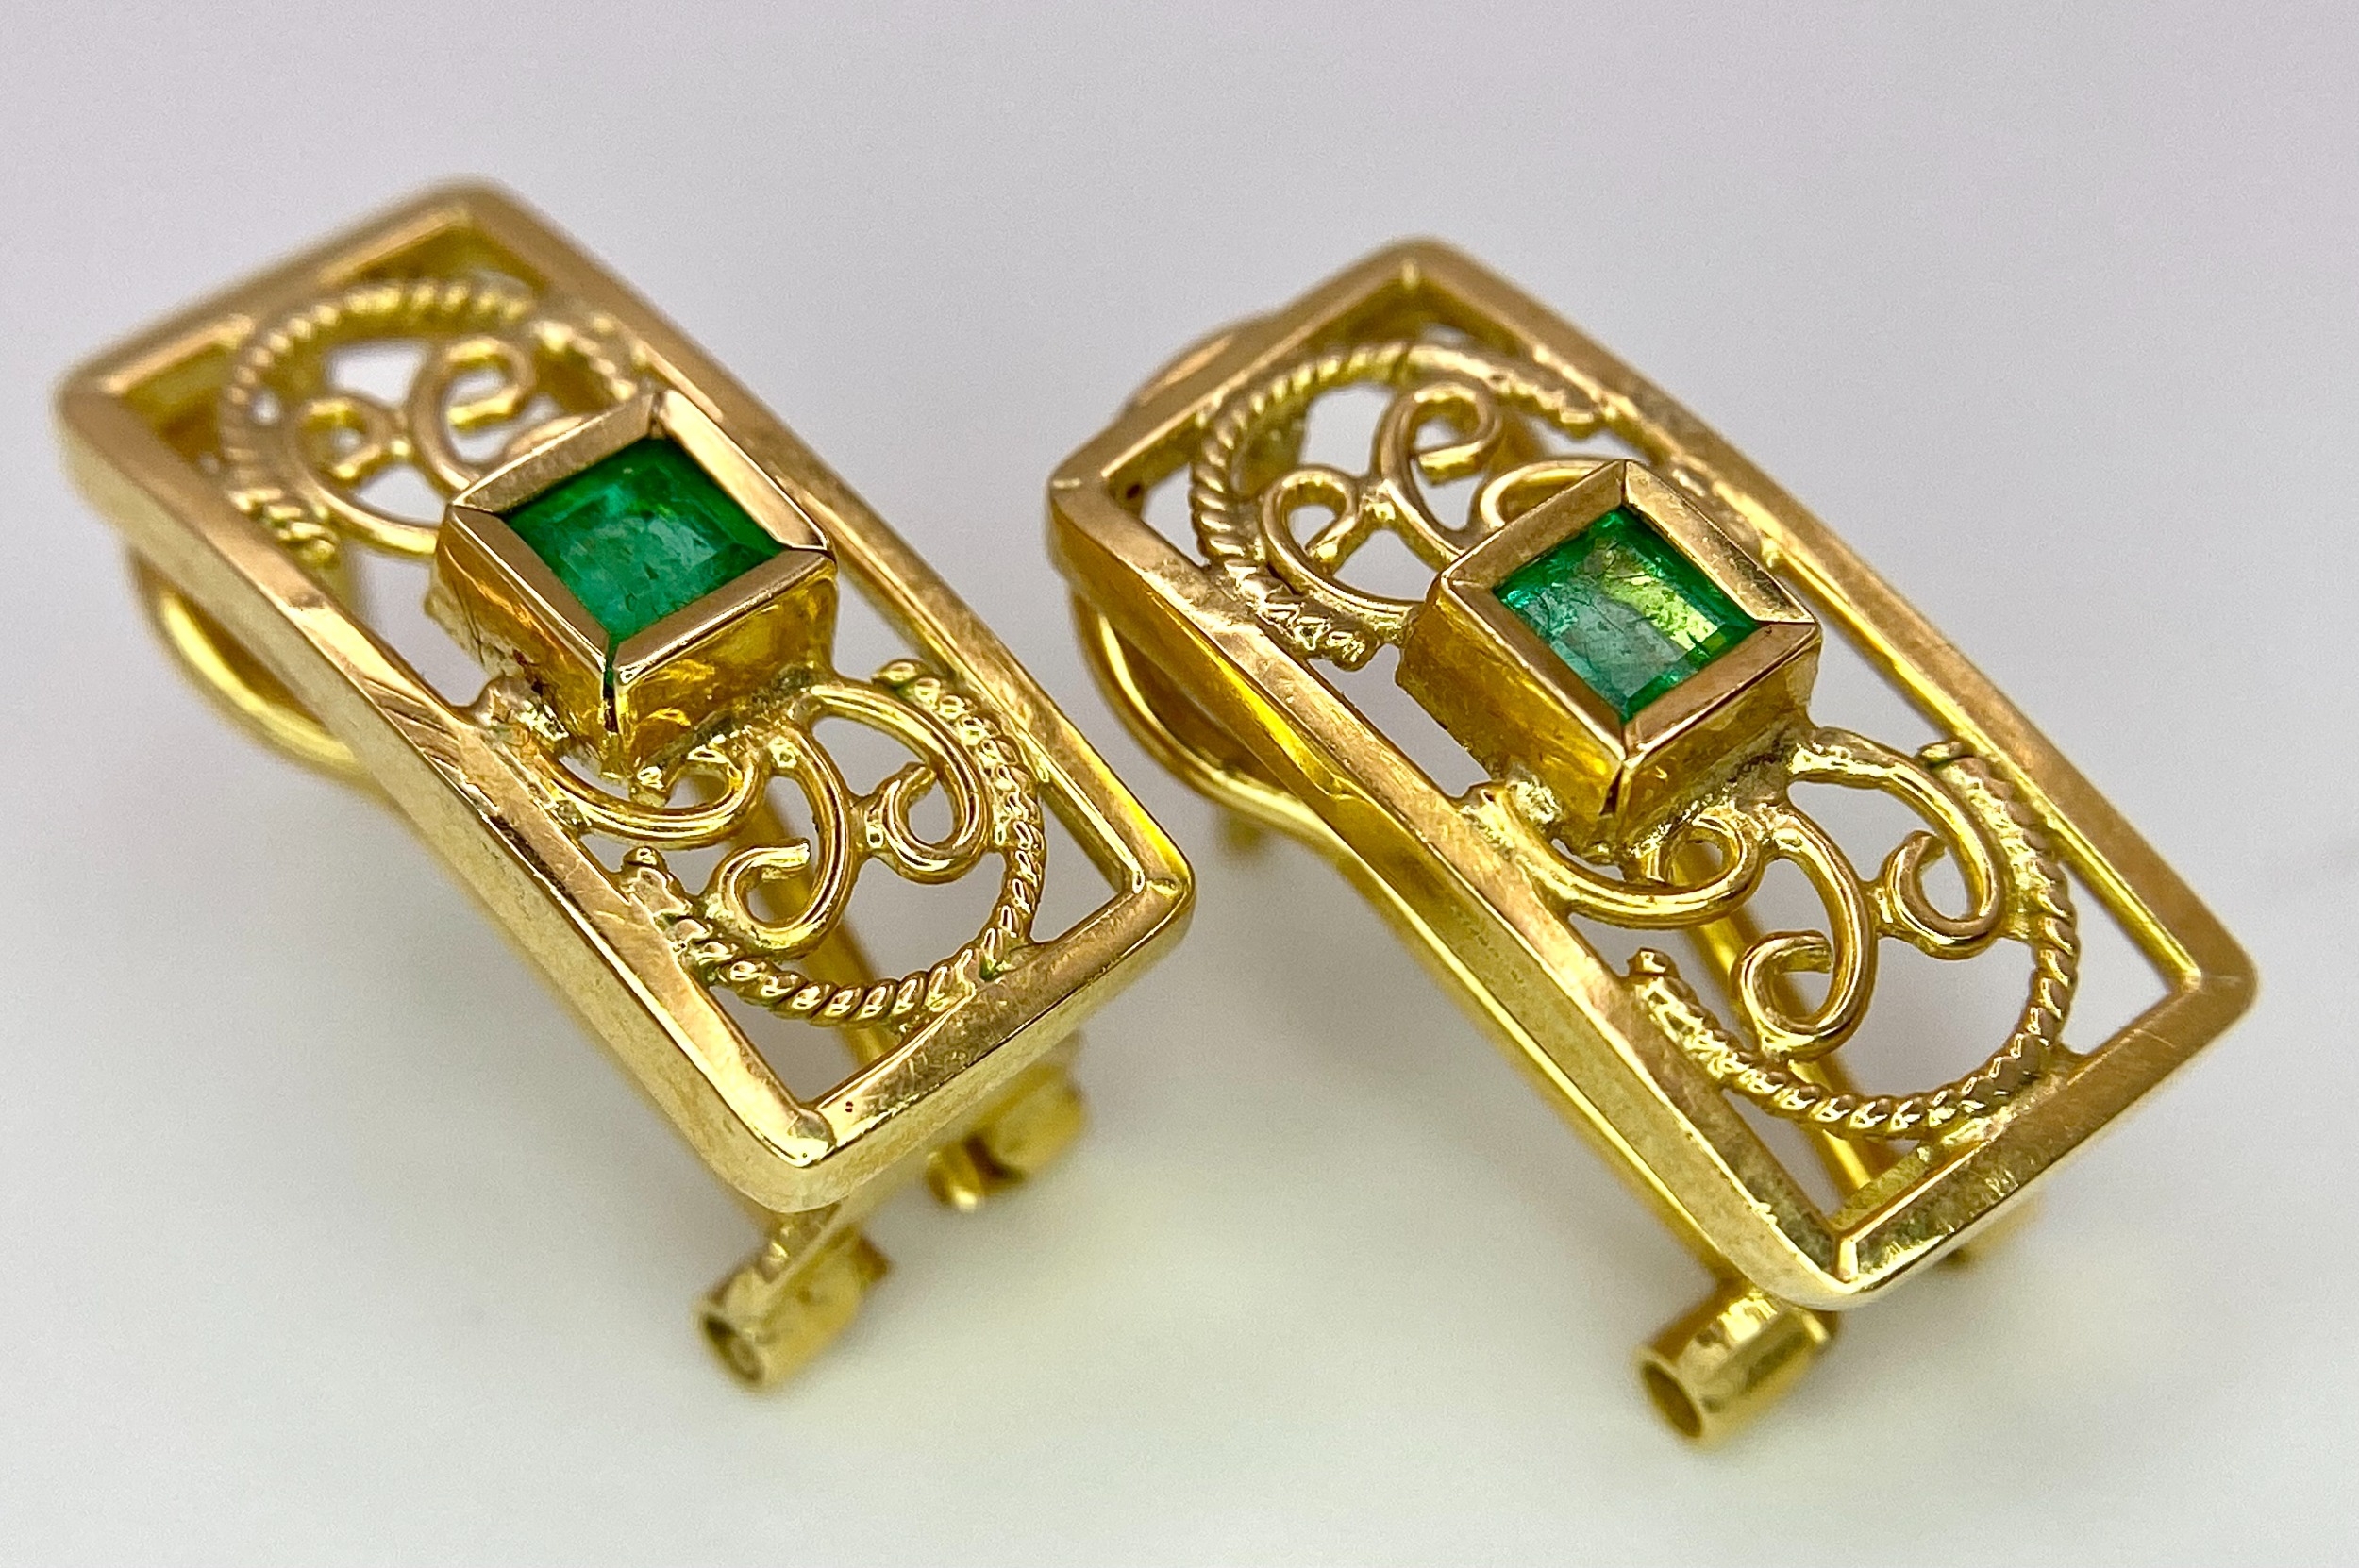 A Pair of 18K Yellow Gold and Emerald Earrings. Clip clasp with pierced decoration. 17mm. 3.9g total - Image 2 of 6